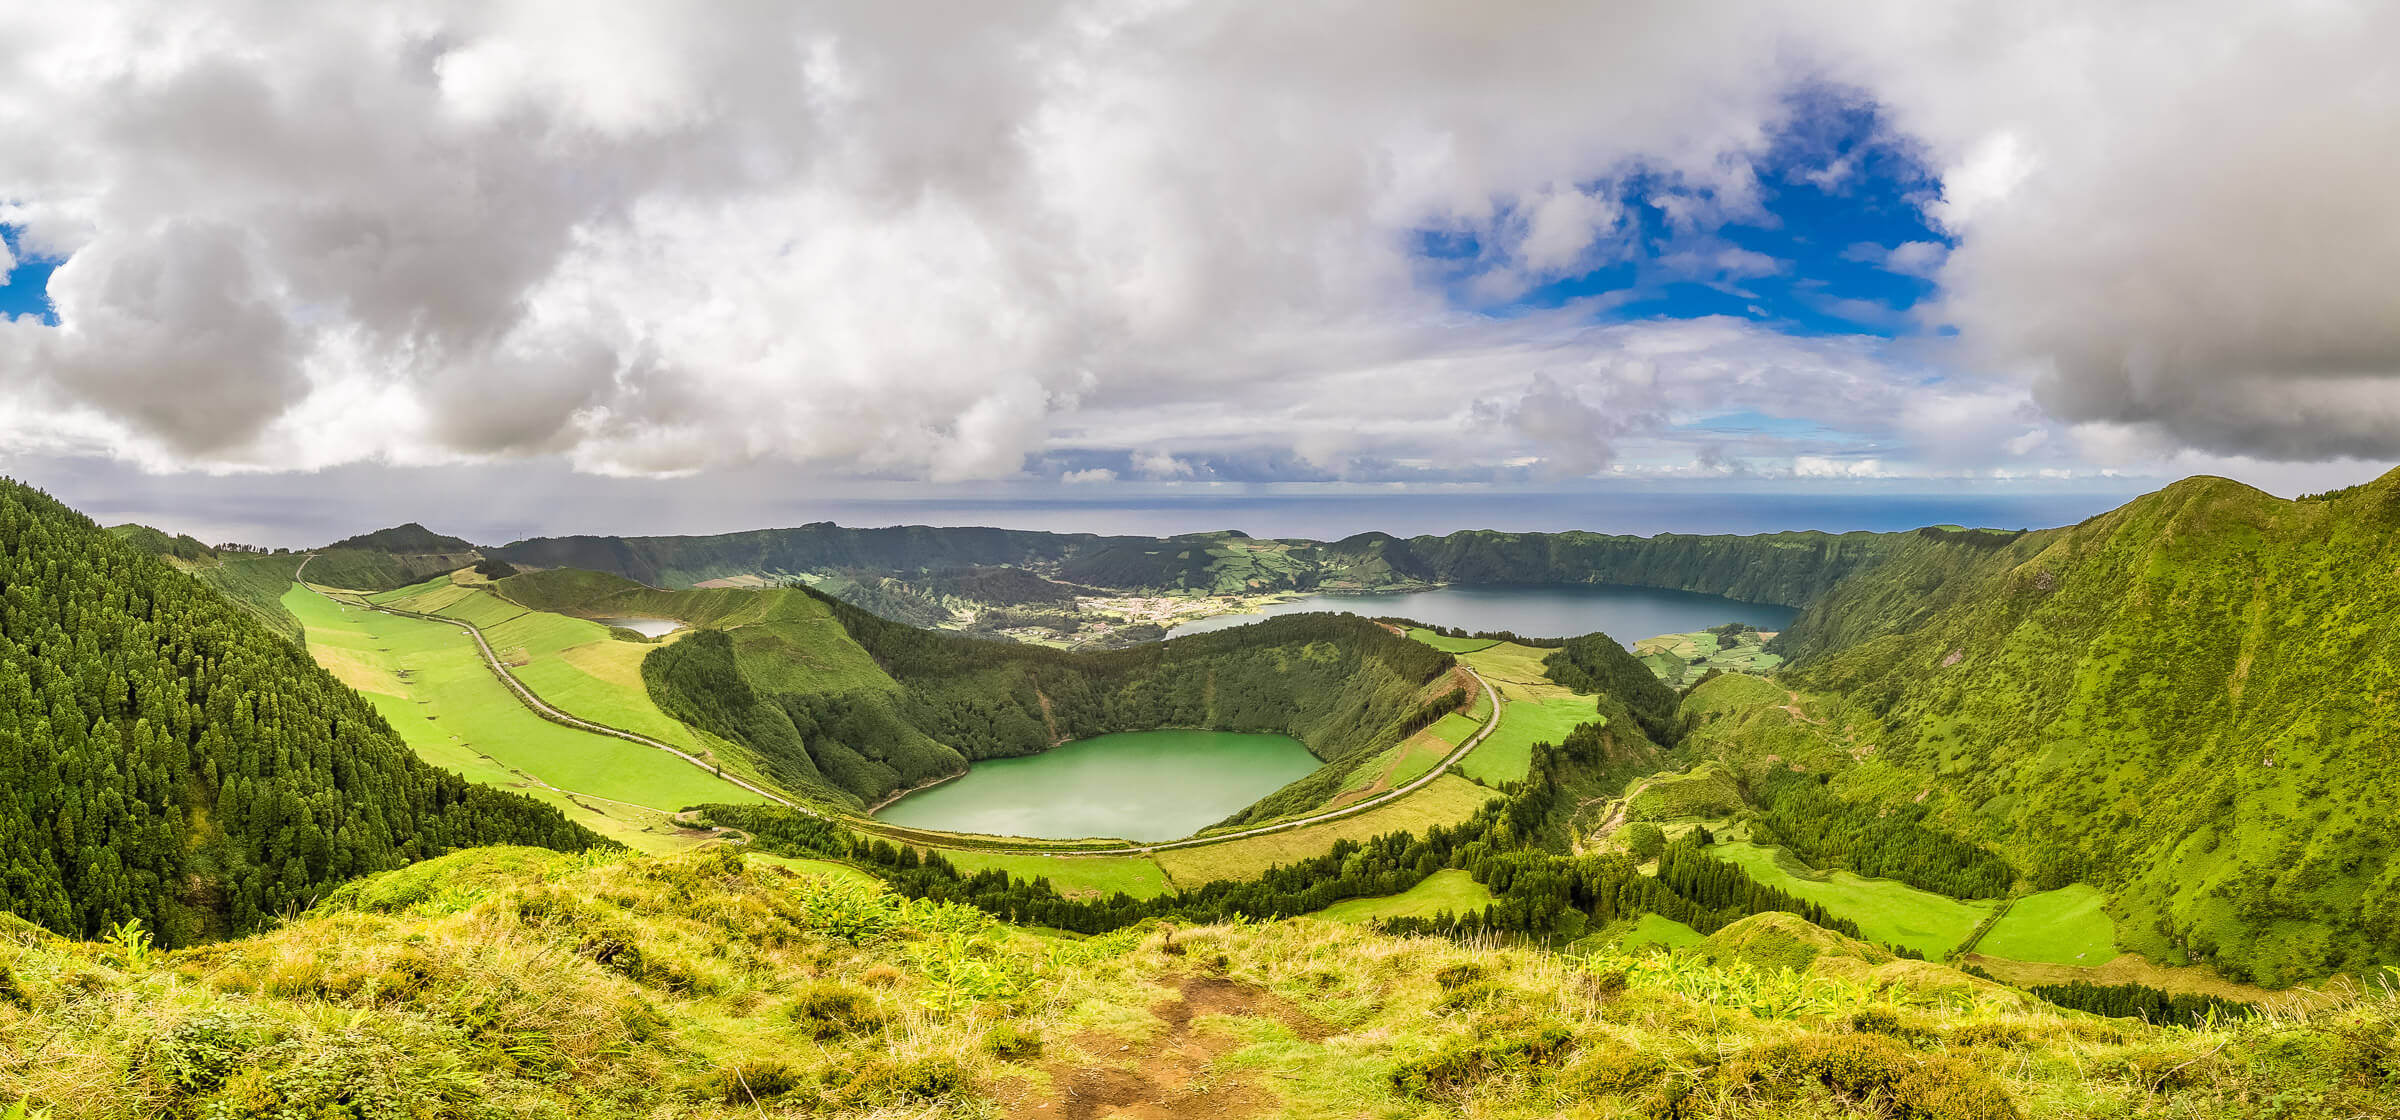 Azores, Travels, Experience the, Photo gallery, 2400x1120 Dual Screen Desktop